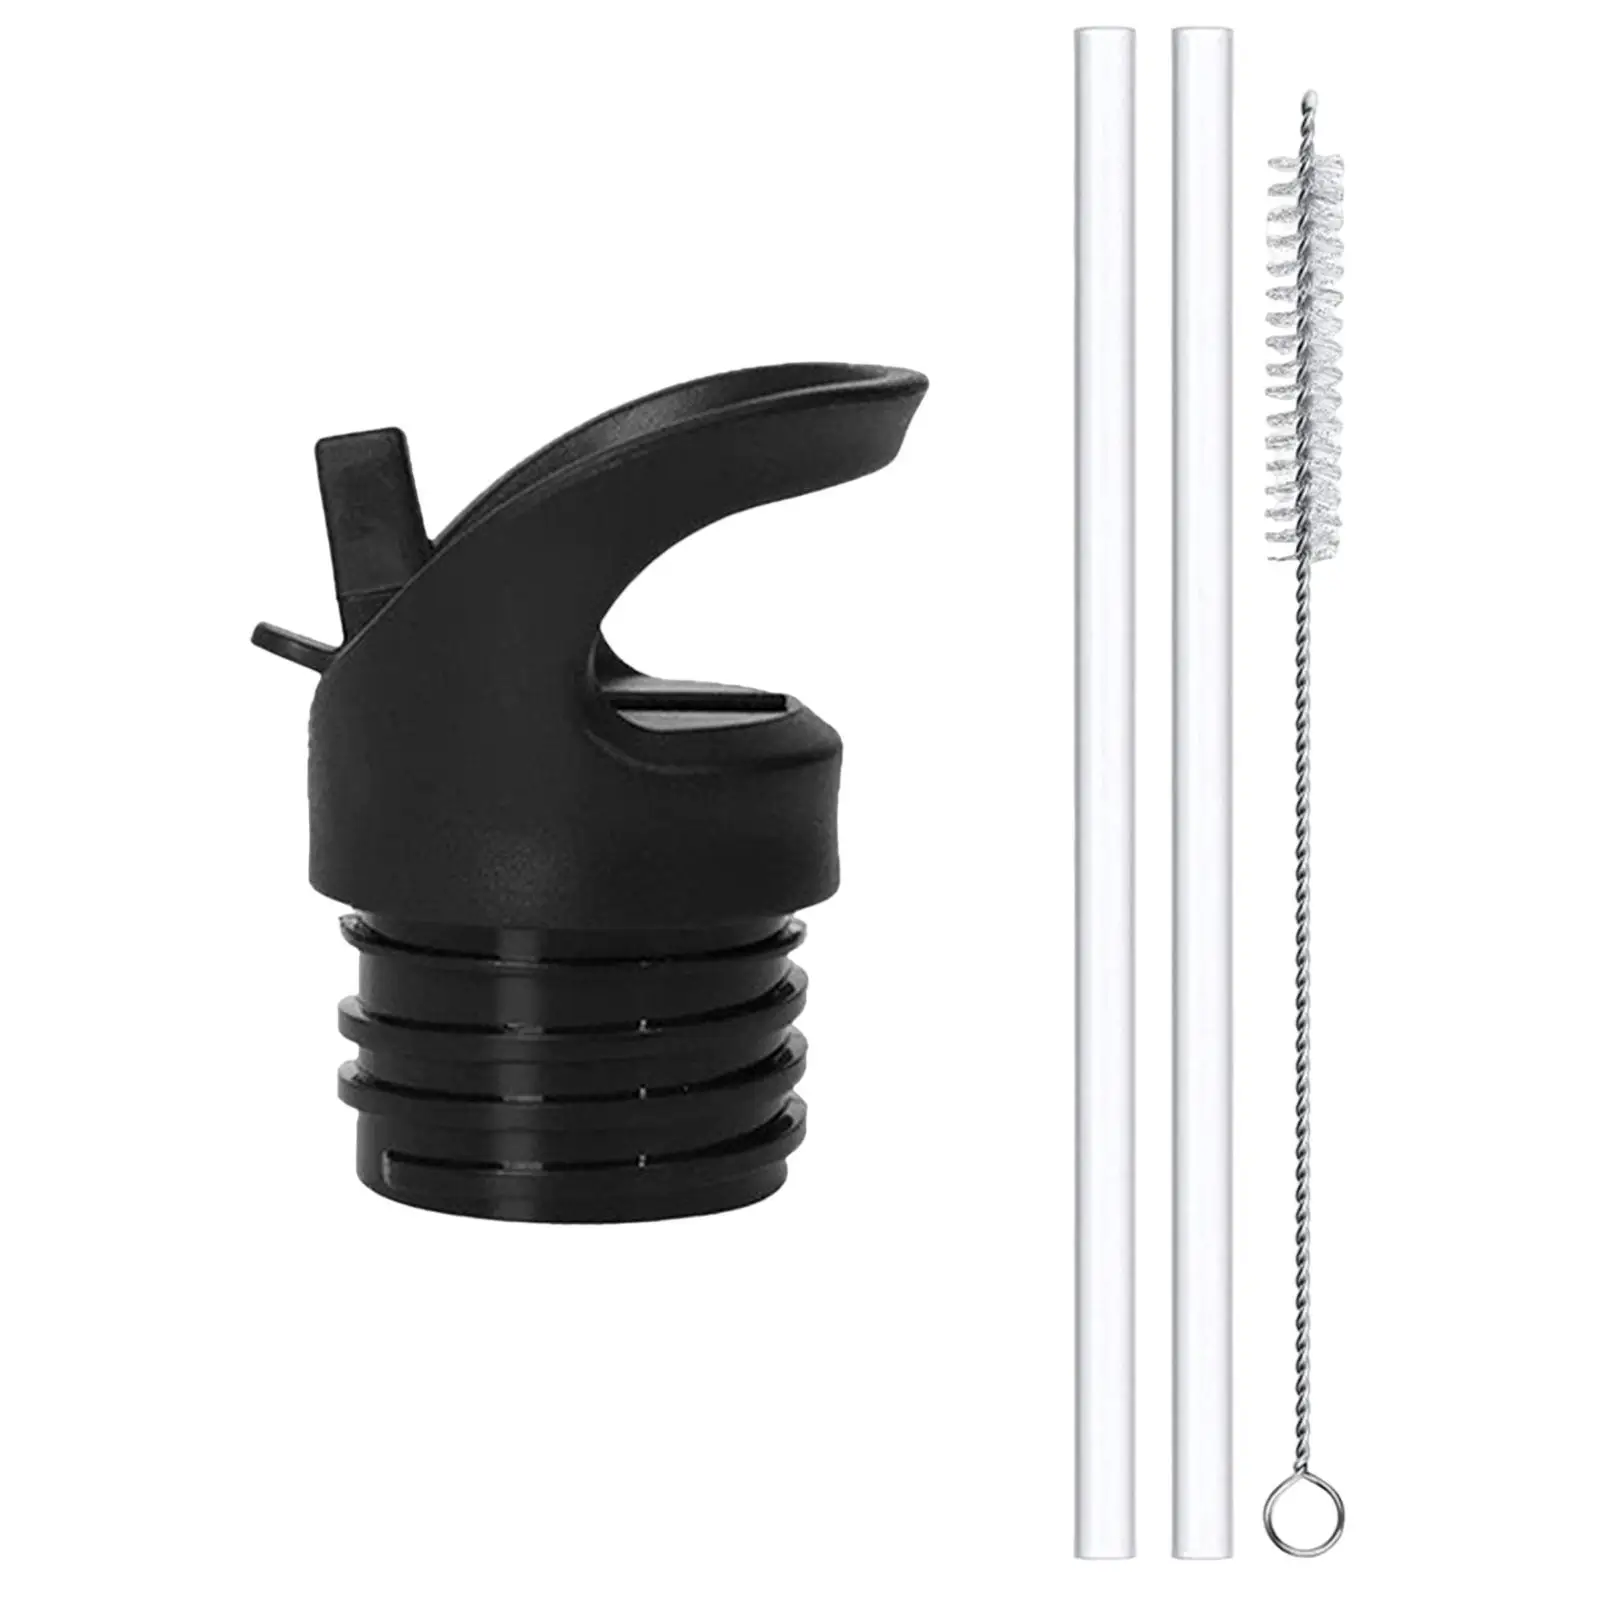 Straw Lid Simple with Straw and Brushes Replacement Cap Dust Cover Lid for Water Bottle Outdoor Standard Mouth Sports Working